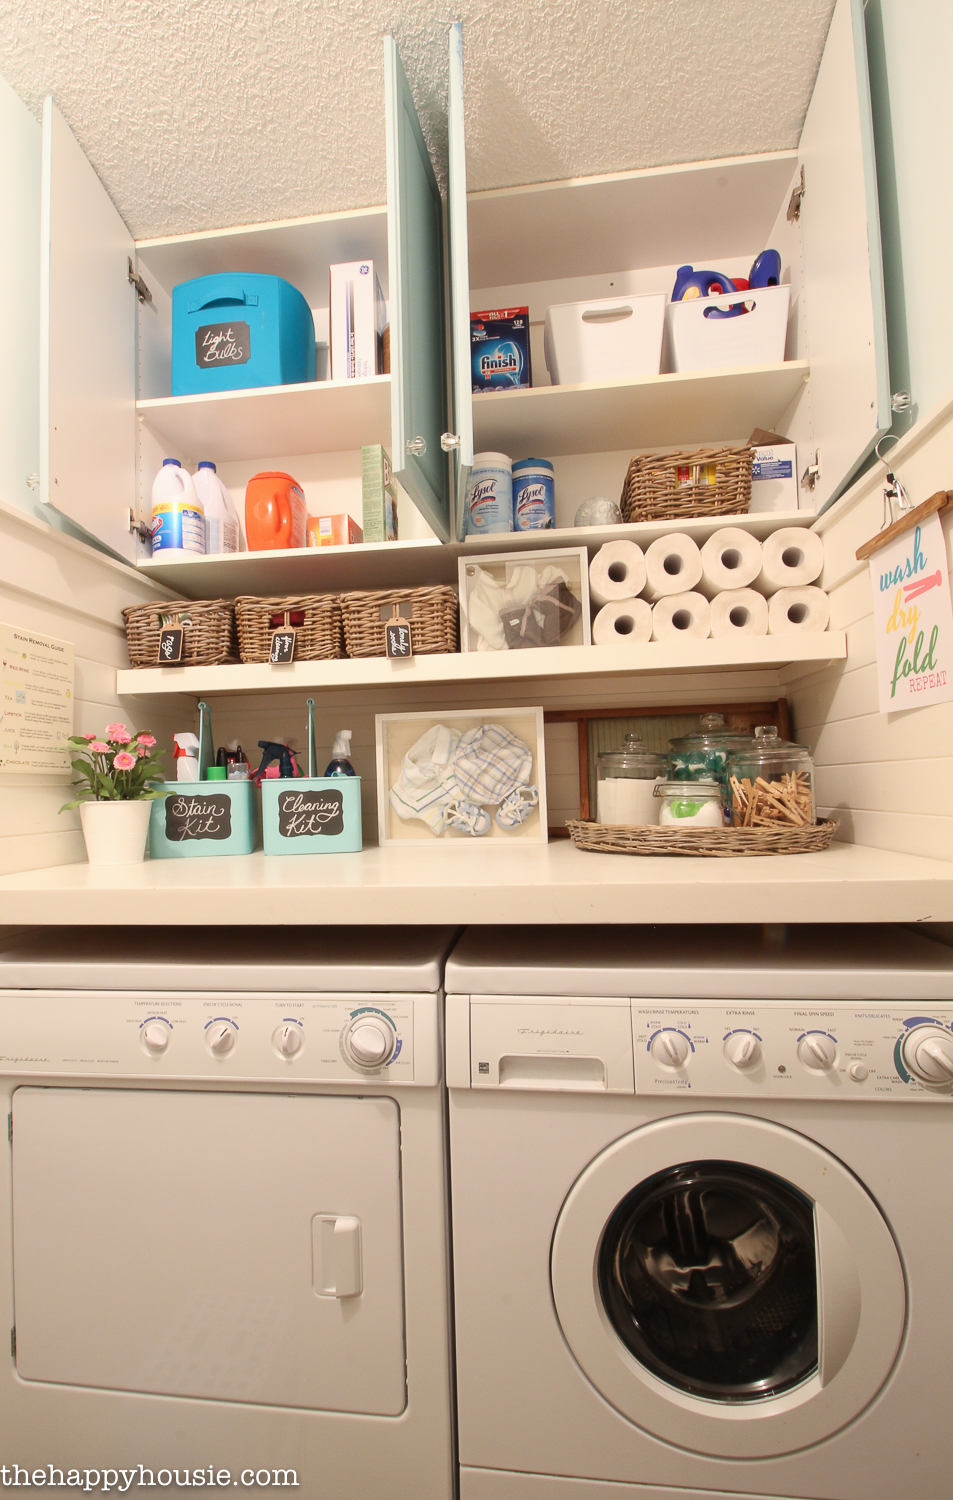 https://www.thehappyhousie.com/wp-content/uploads/2017/02/How-to-Completely-Organize-Your-Laundry-Room-with-cute-storage-ideas-and-free-printable-laundry-room-art-5.jpg